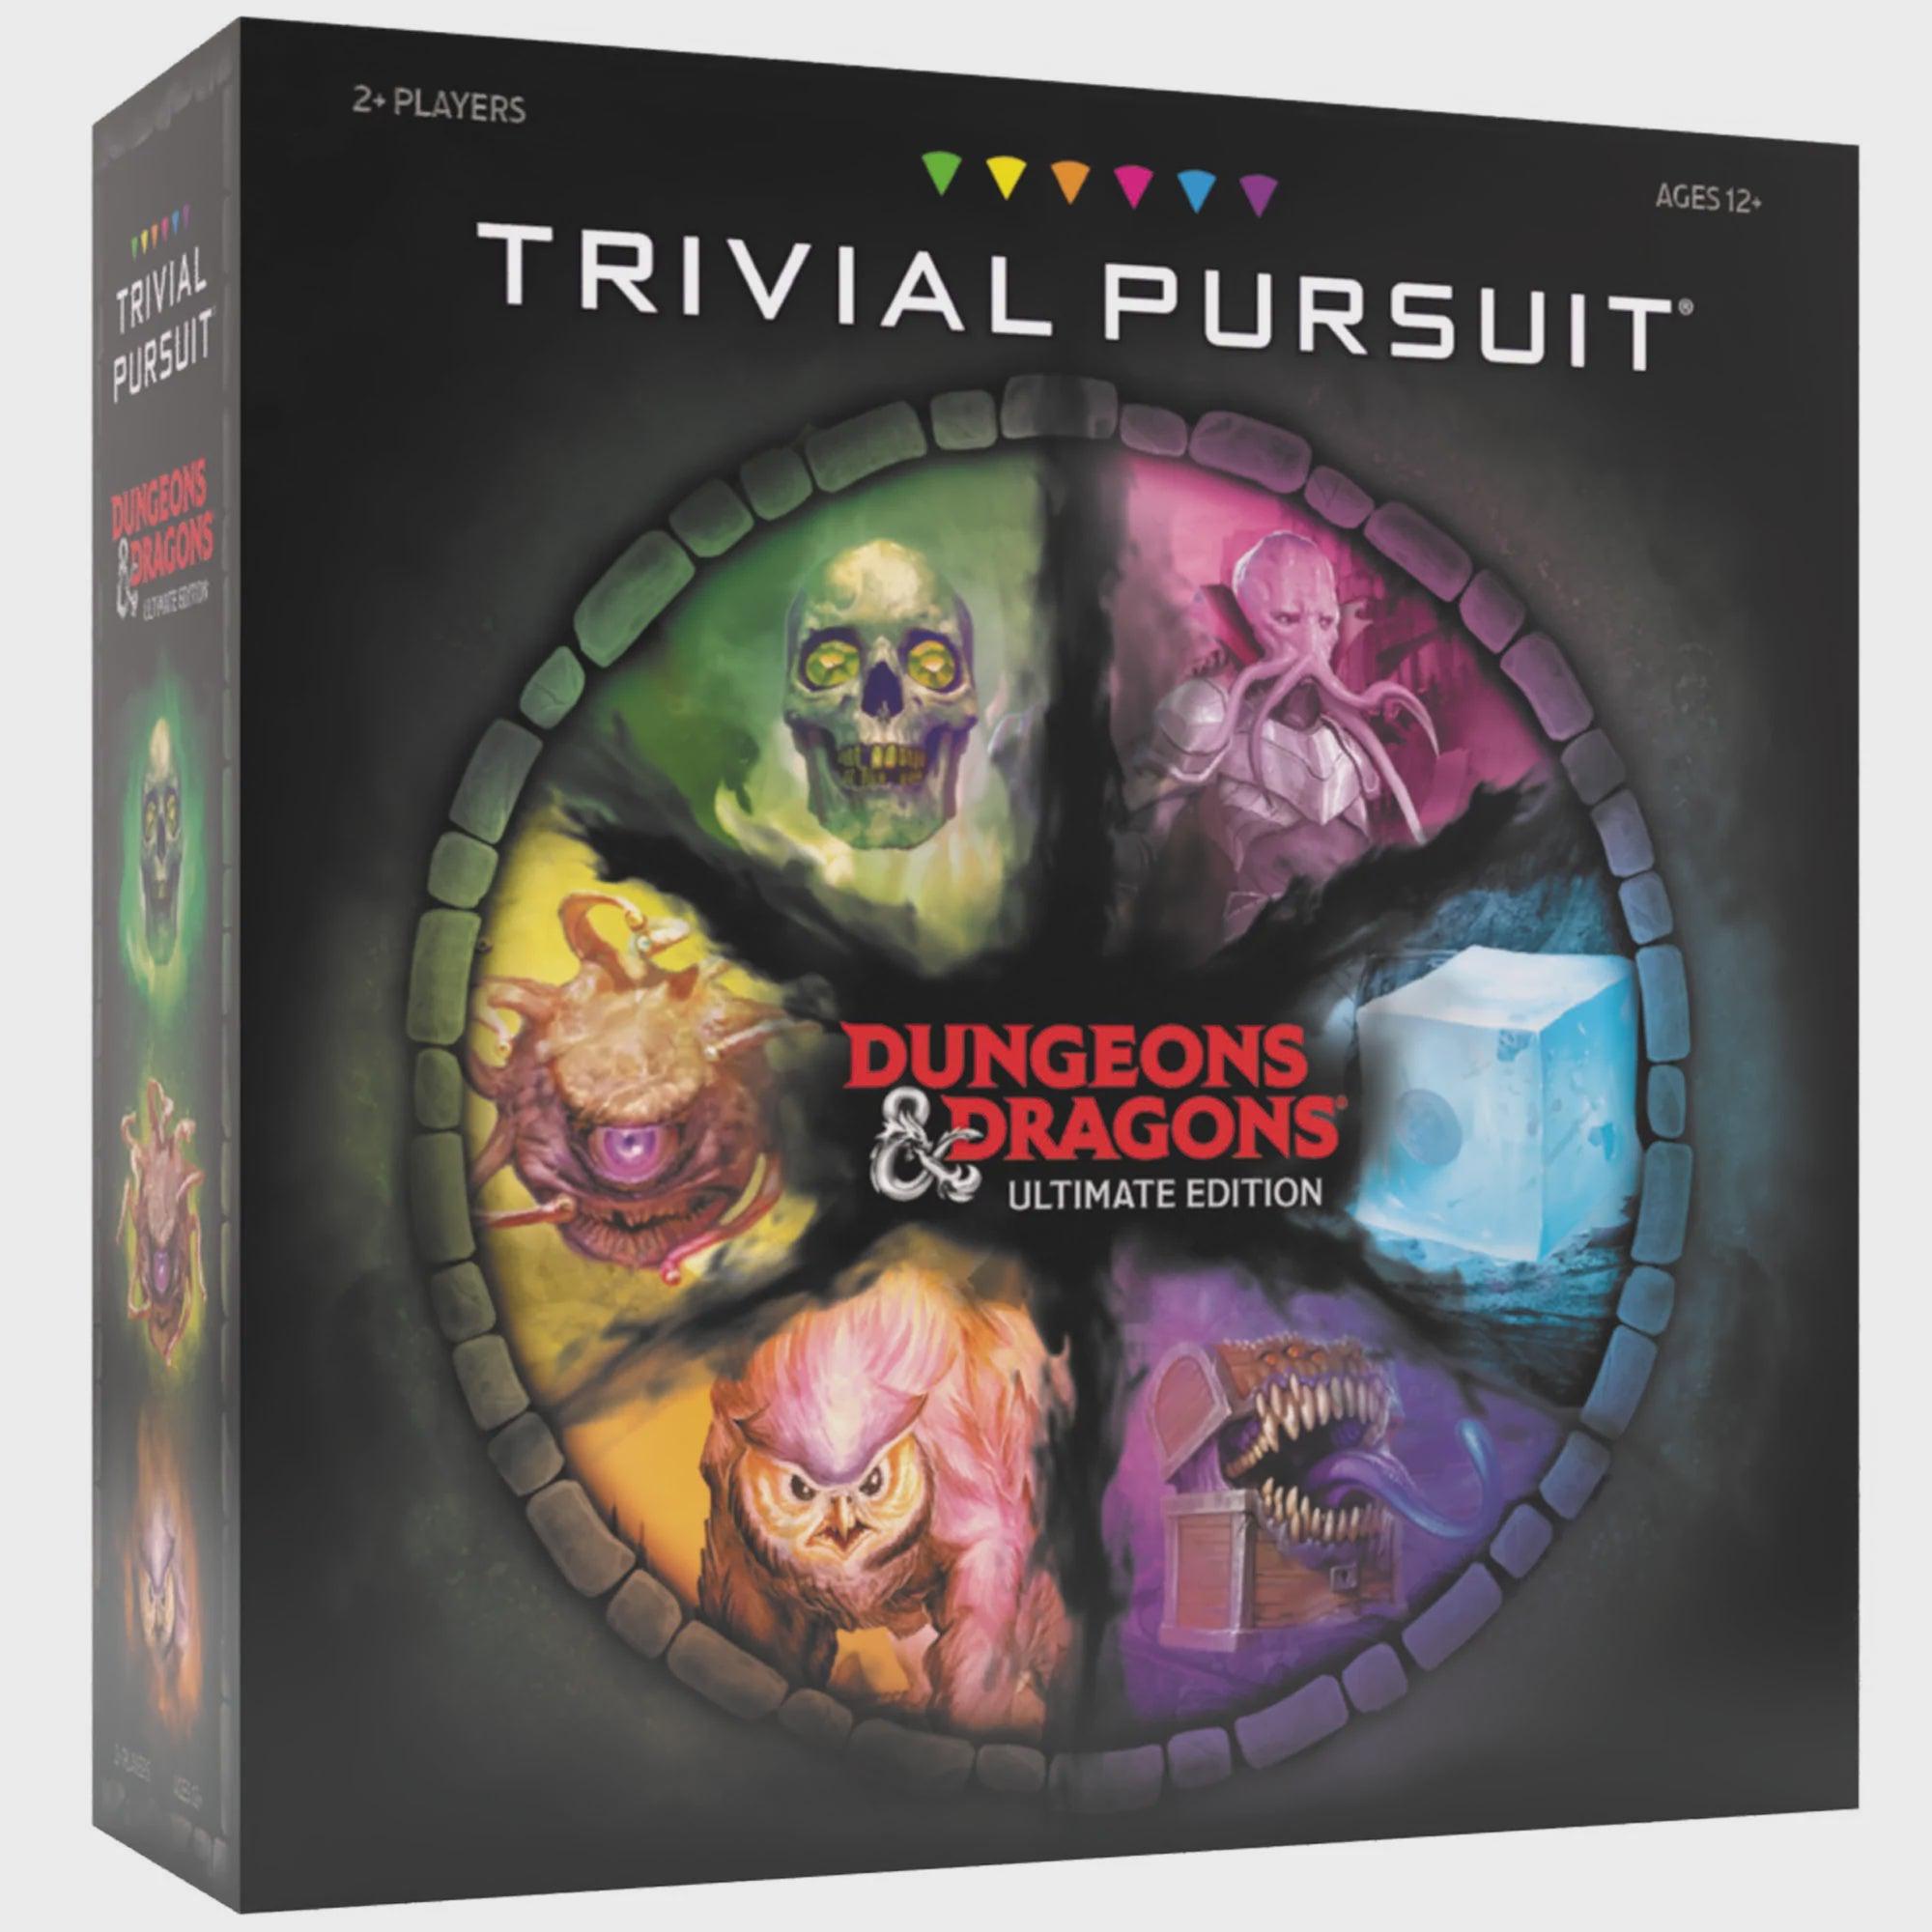 USAopoly-Trivial Pursuit: Dungeons & Dragons Ultimate Edition-TP056-370-Legacy Toys